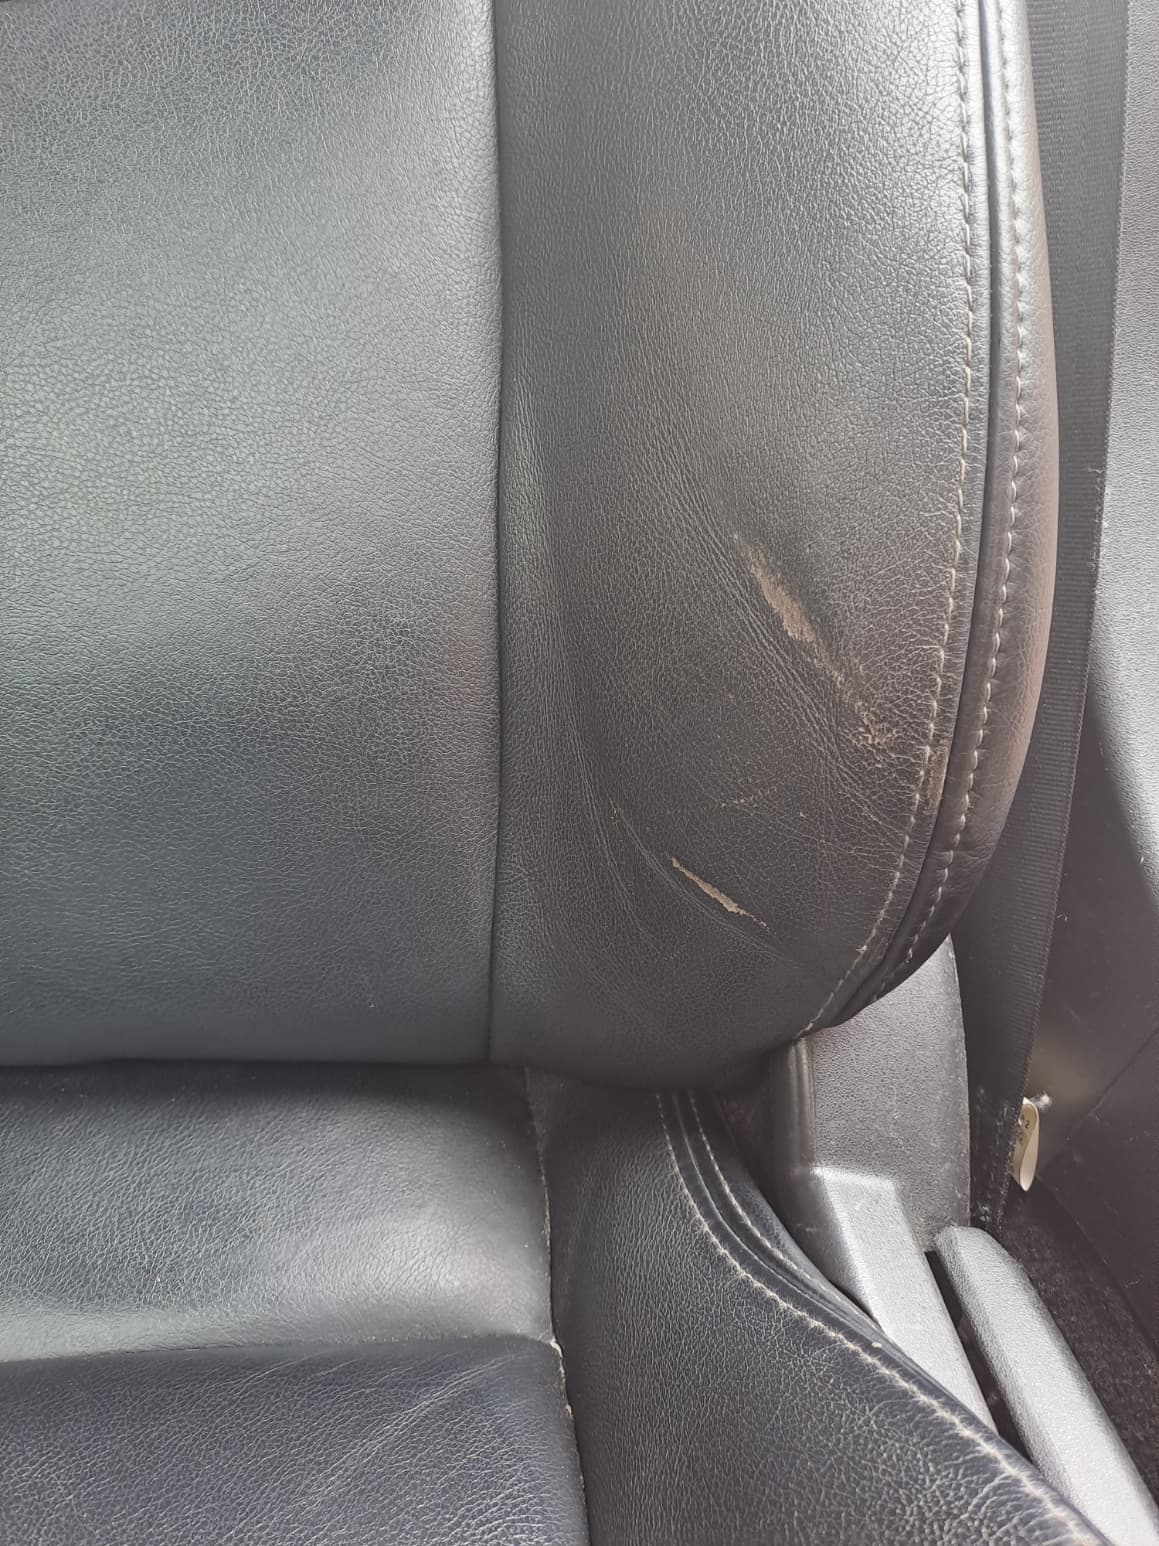 How to repair, restore and re-dye leather car seats using DIY